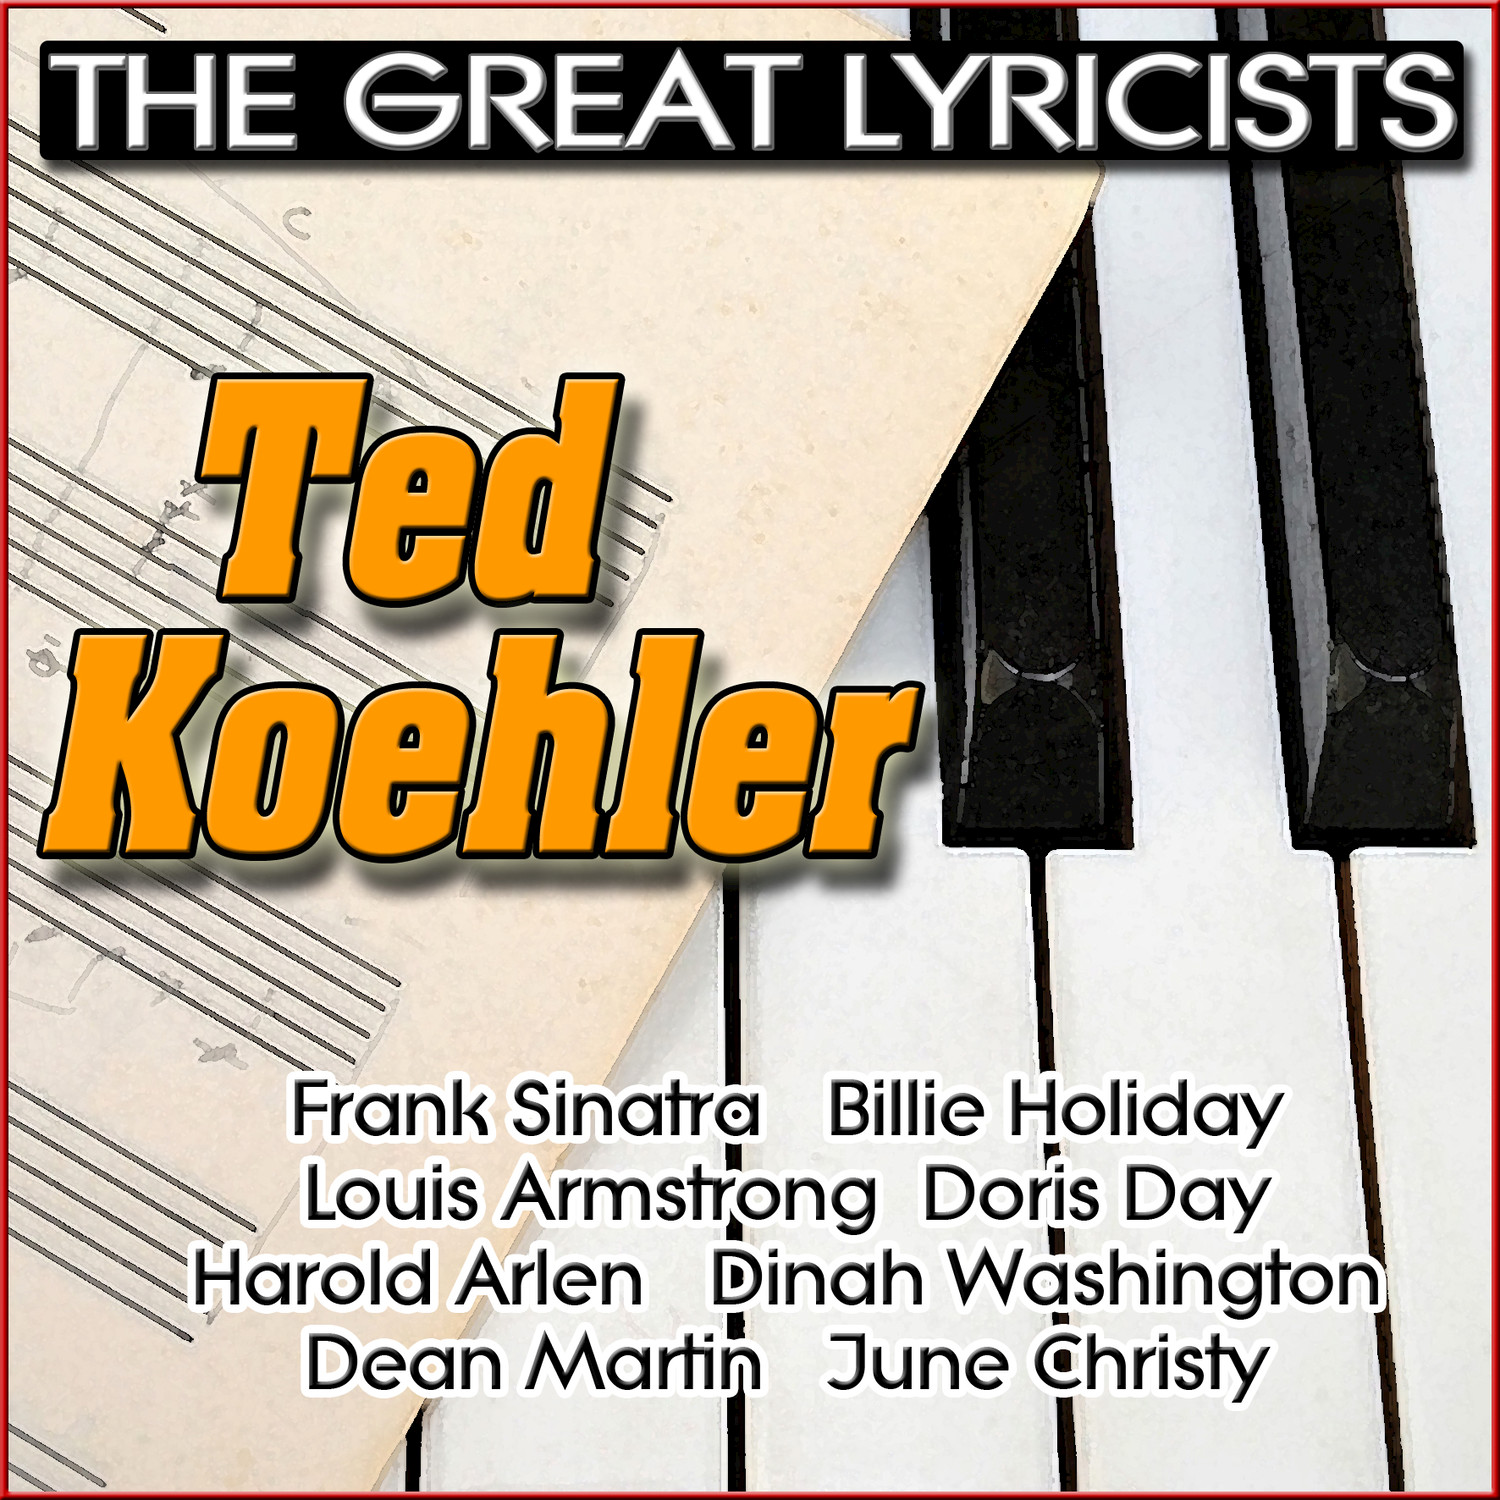 The Great Lyricists - Ted Koehler